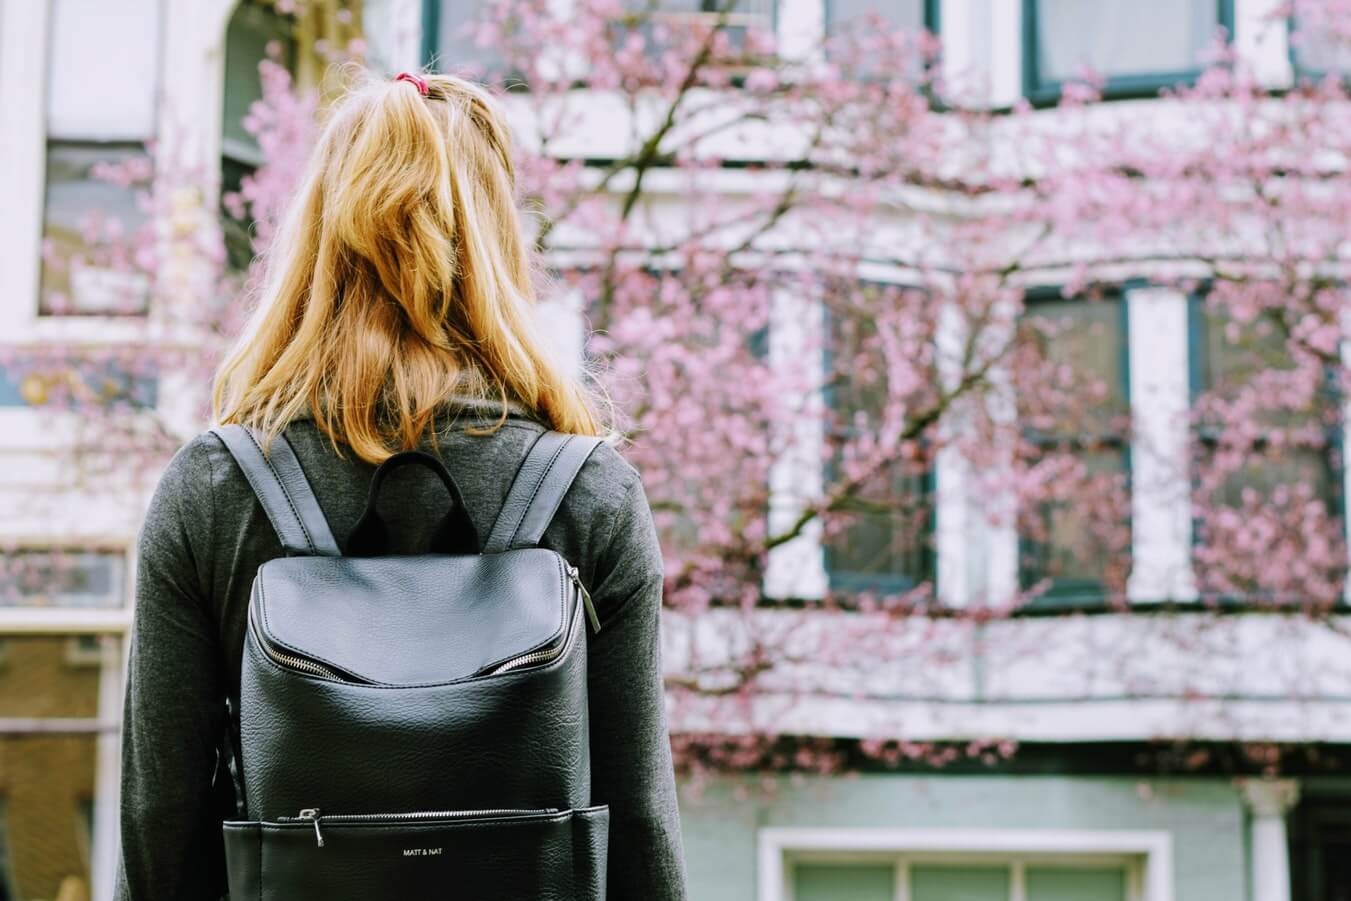 Teen going off to college